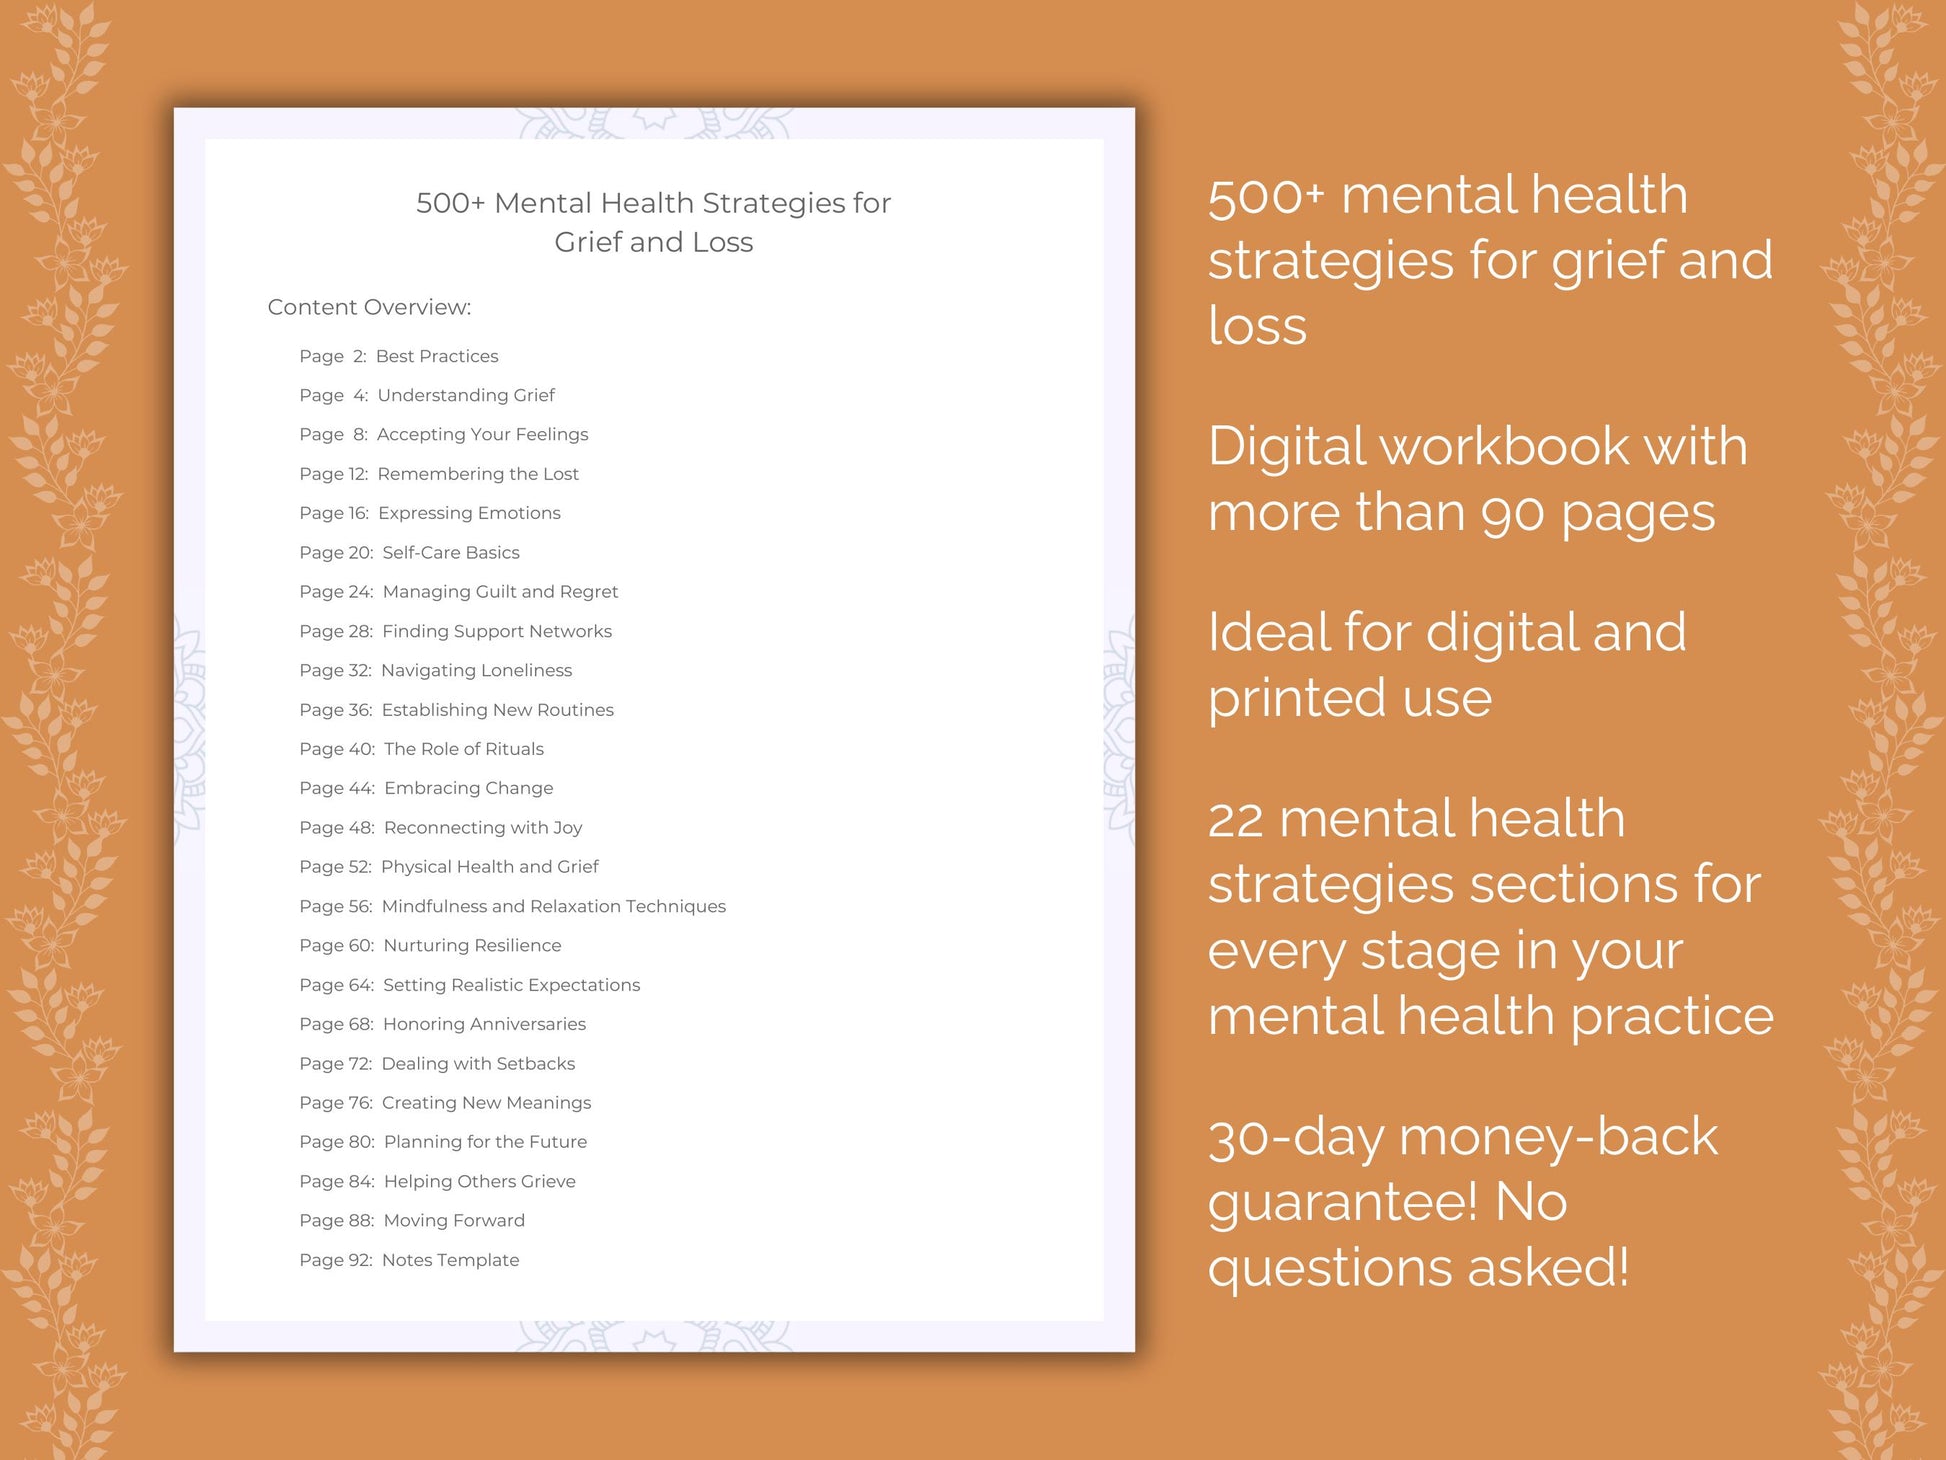 Grief and Loss Mental Health Strategies